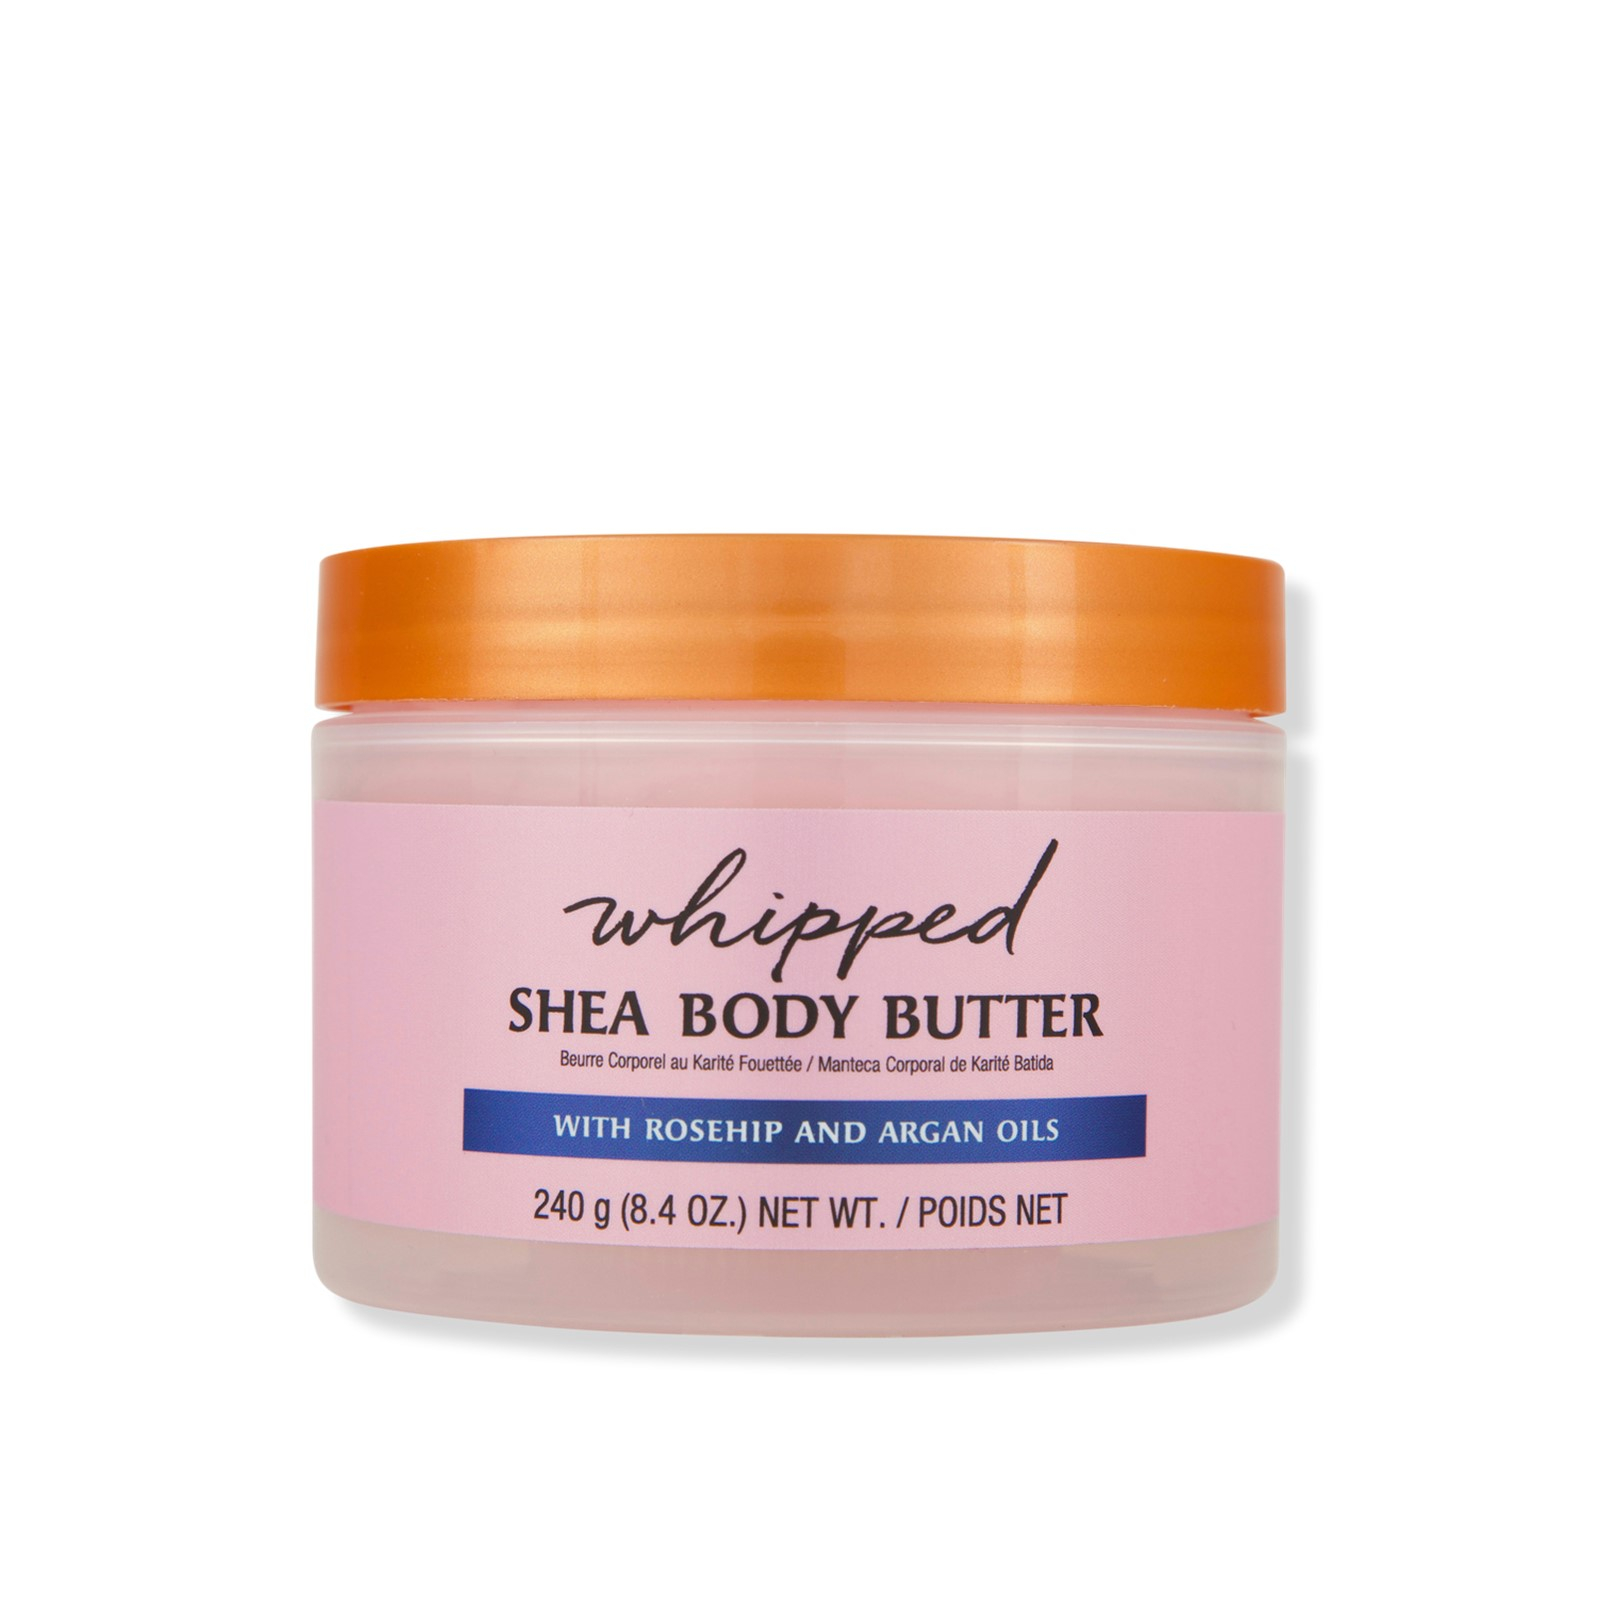 https://static.beautytocare.com/media/catalog/product/t/r/tree-hut-moroccan-rose-whipped-shea-body-butter-240g.jpg